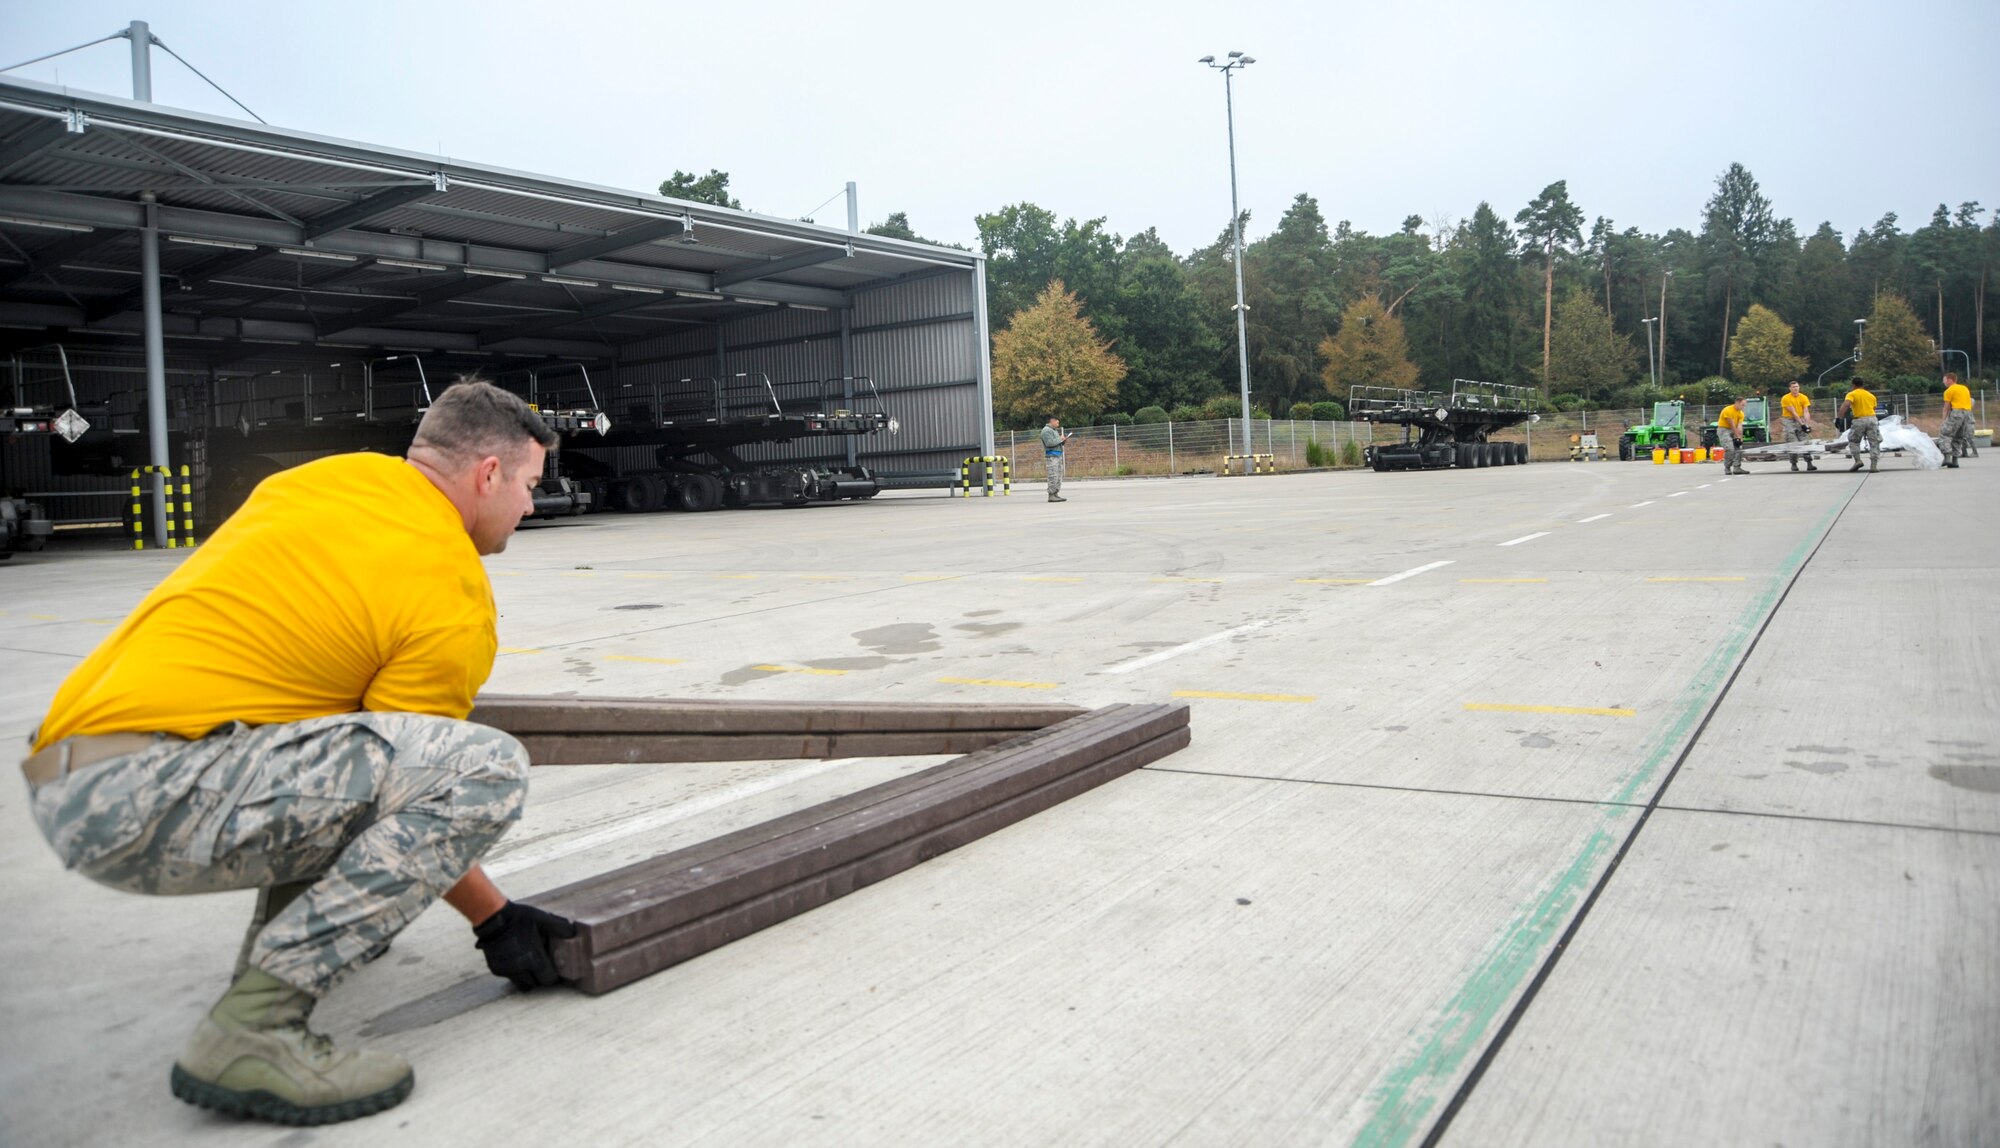 Staff Sgt. Benjamin Patton, 435th Contingency Response Squadron mobile aerial porter, lifts the last pieces of dunnage as the rest of his team moves a pallet during the physical challenge obstacle course of the 2016 European Port Dawg Rodeo Sept. 17, 2016, at Ramstein Air Base, Germany. During the course, Airmen had to unload a pallet, move the items and pallet approximately 100 yards away, rebuild the pallet and run a relay around an apron. (U.S. Air Force photo/Staff Sgt. Timothy Moore)